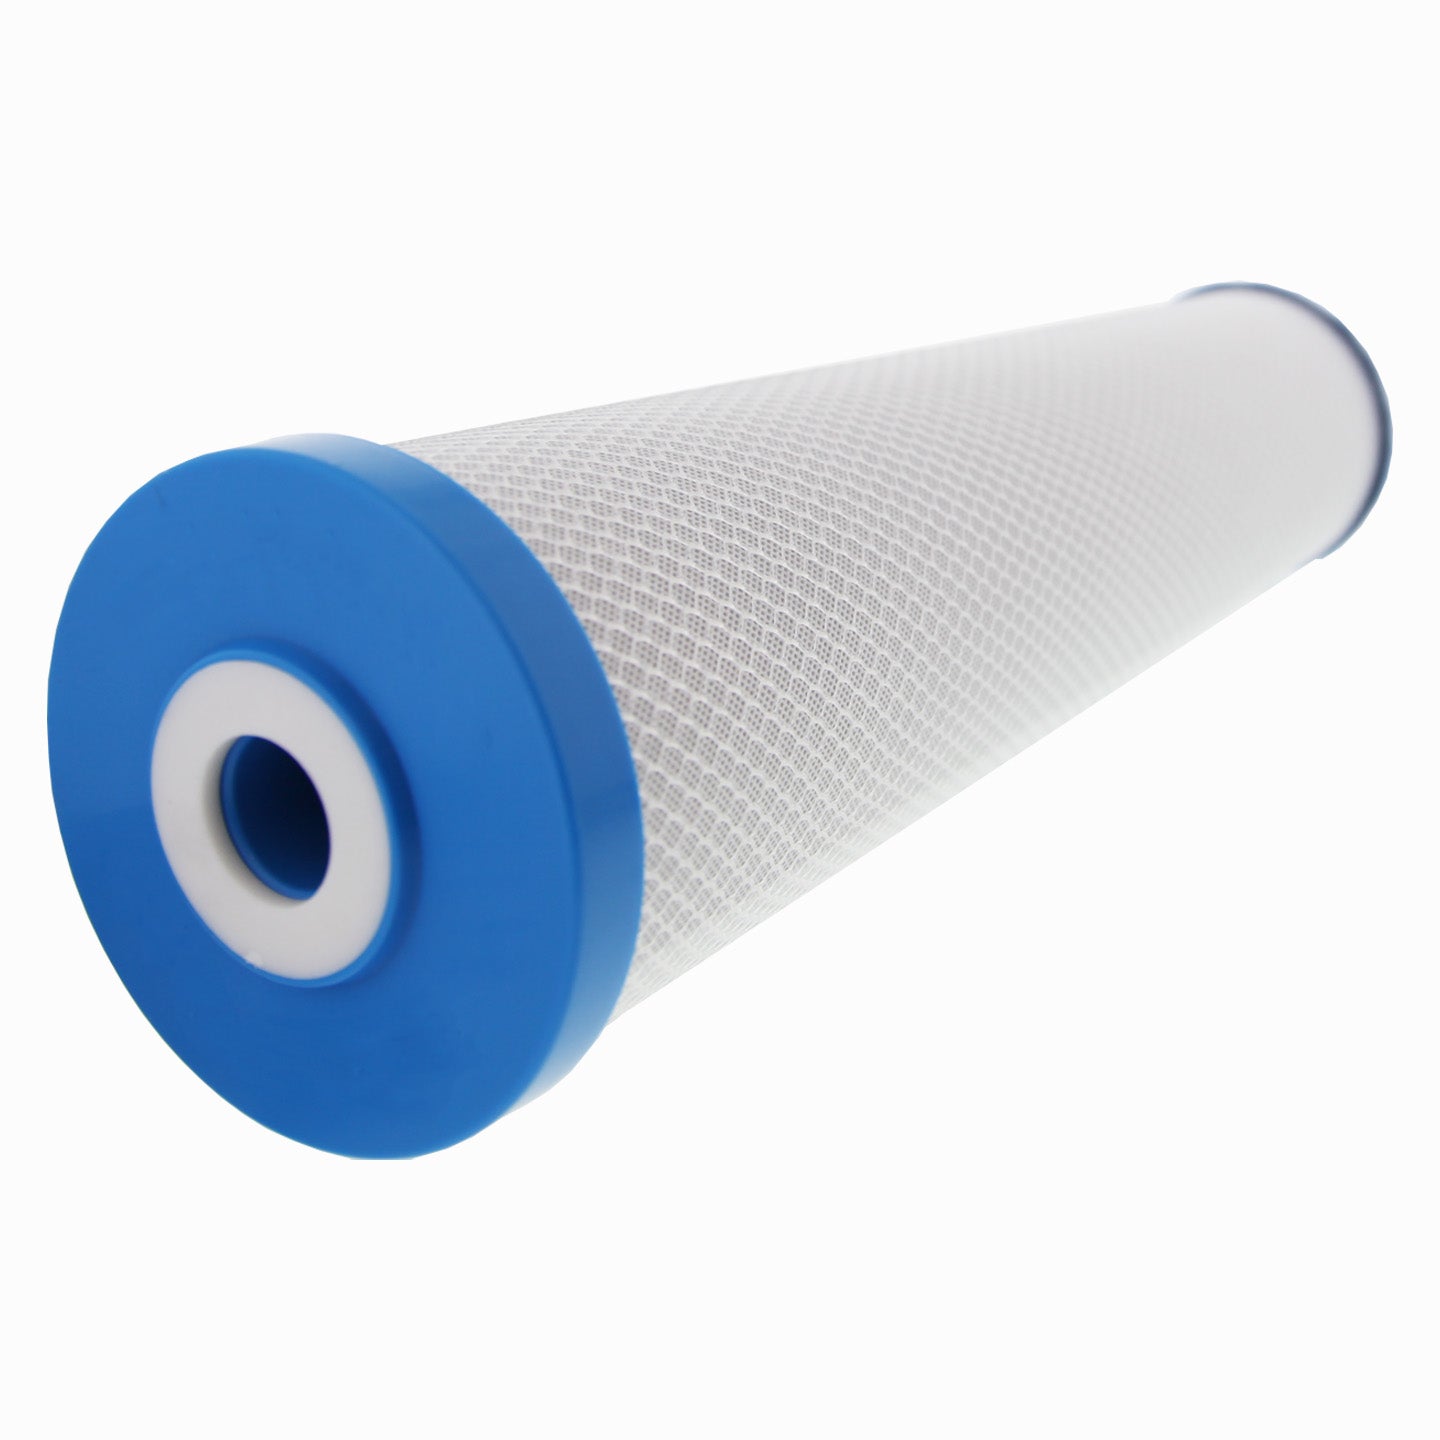 20 X 4.5 Carbon Block Replacement Filter by Tier1 (0.5 micron)